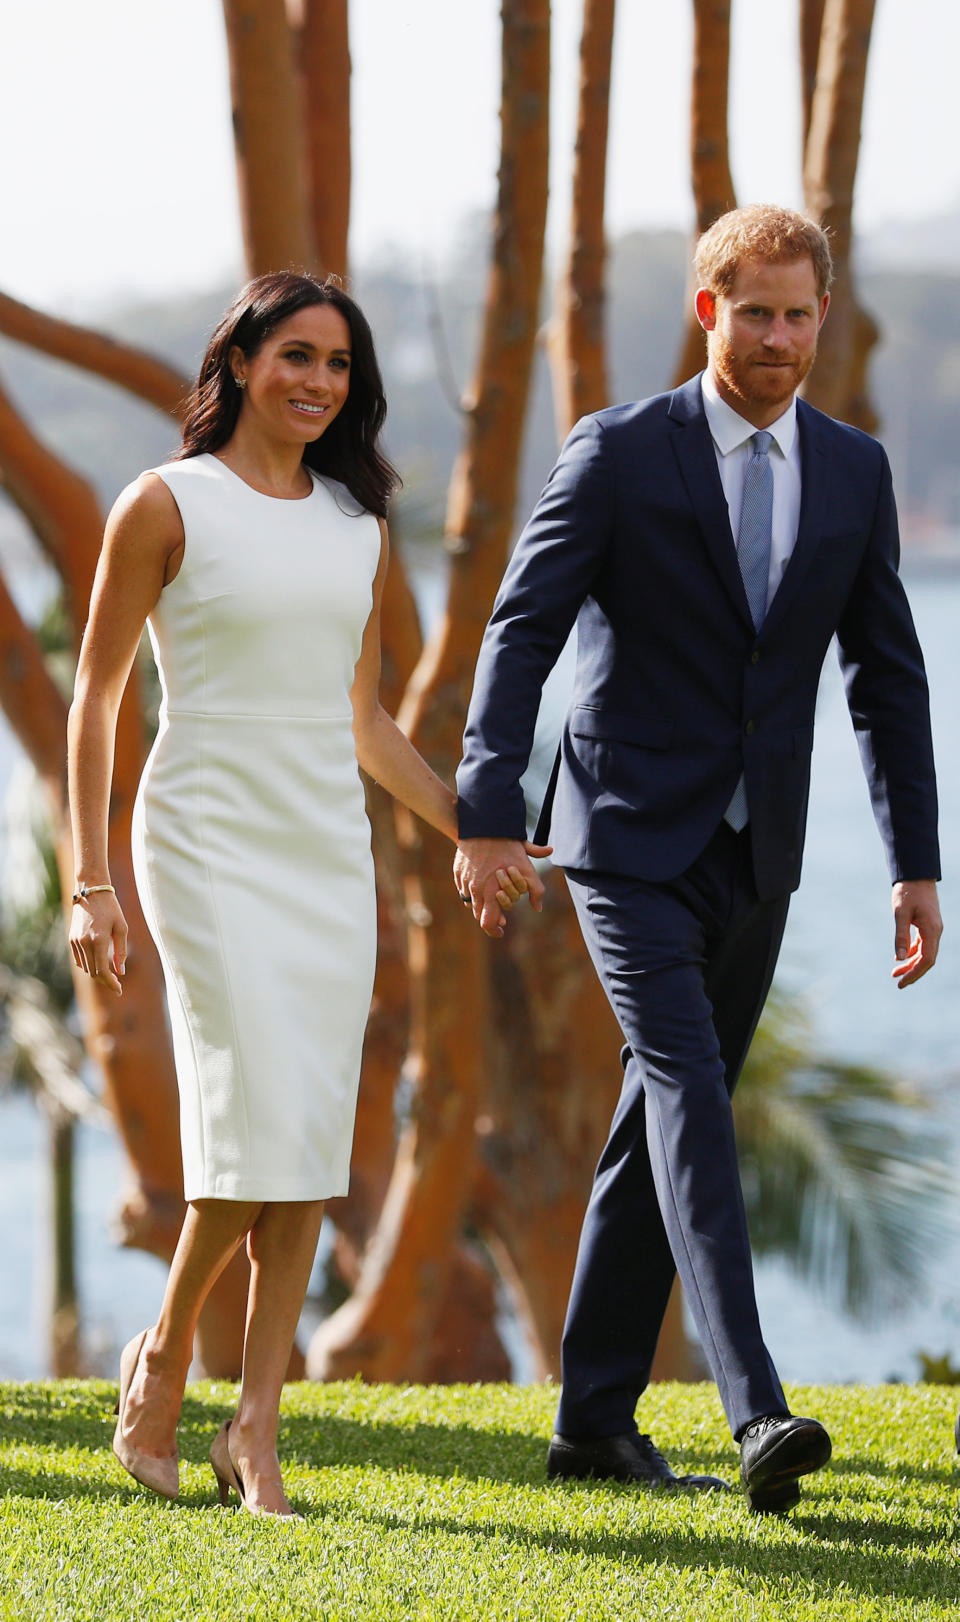 The Duke of Sussex chose a navy Hugo Boss suit to kick-start the royal tour of Australia [Photo: Getty]